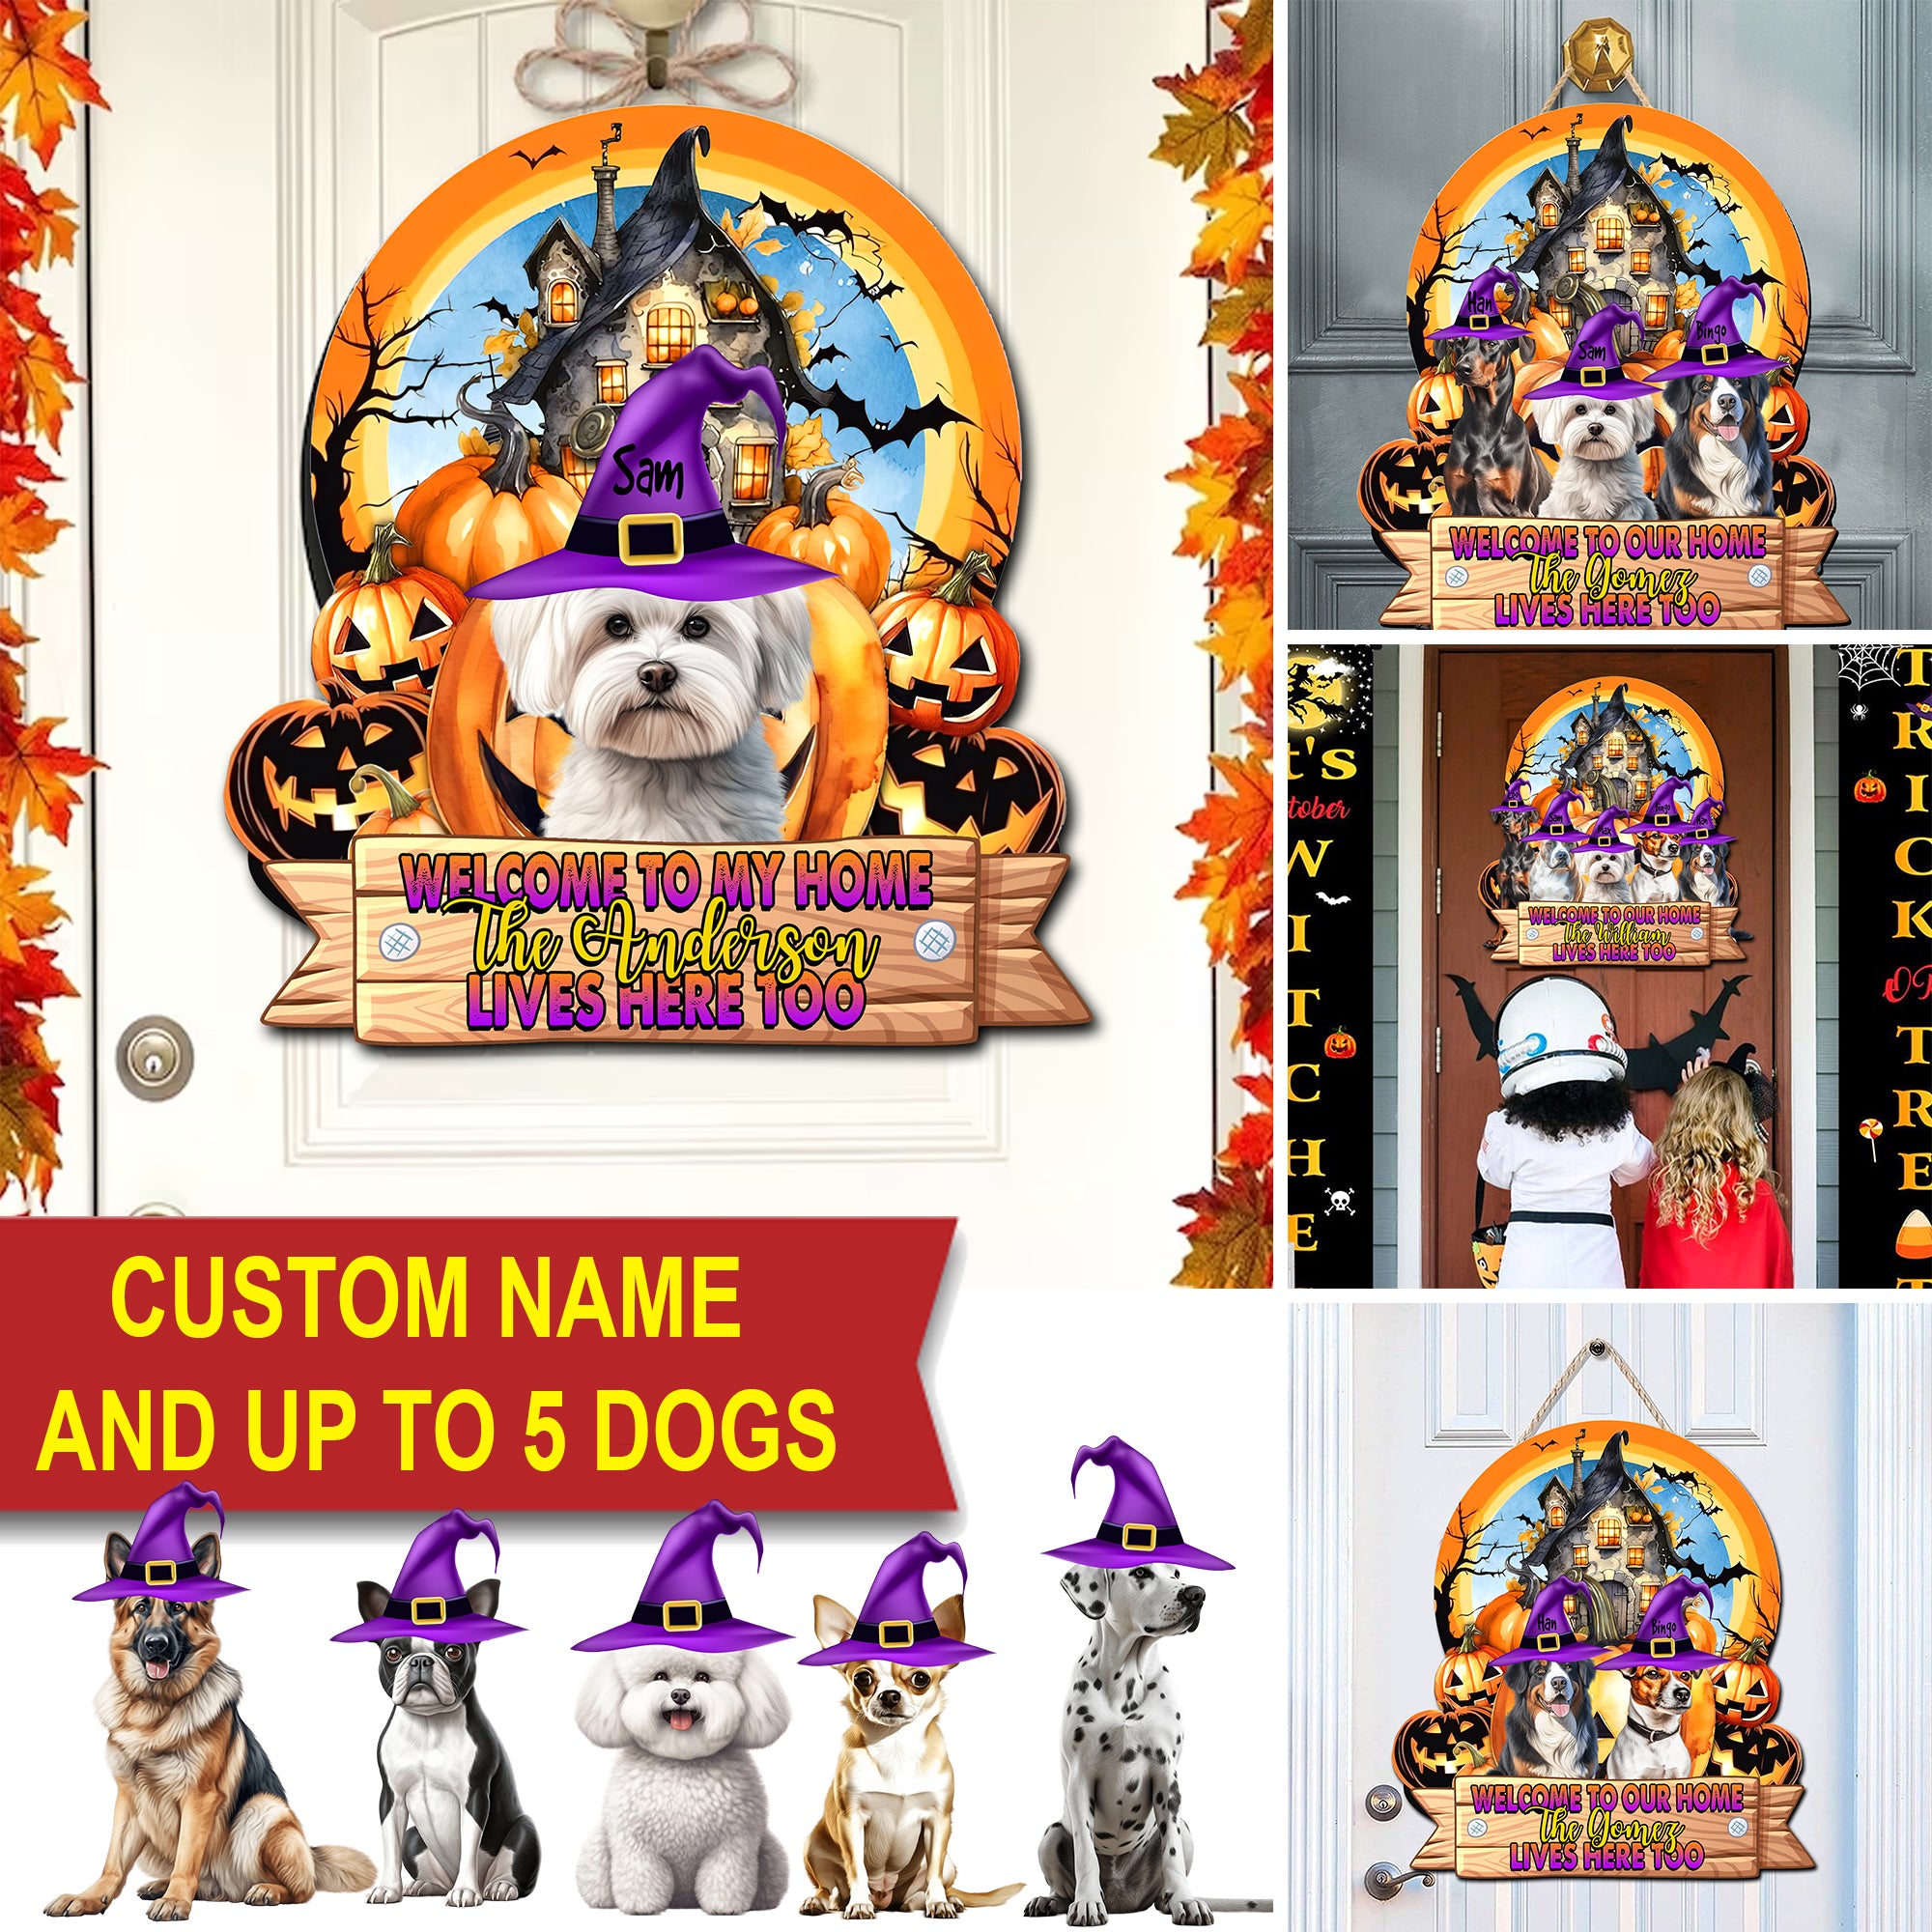 Welcome To Pets Home - Personalized Wooden Door Sign - Halloween For Pets - Halloween Gift